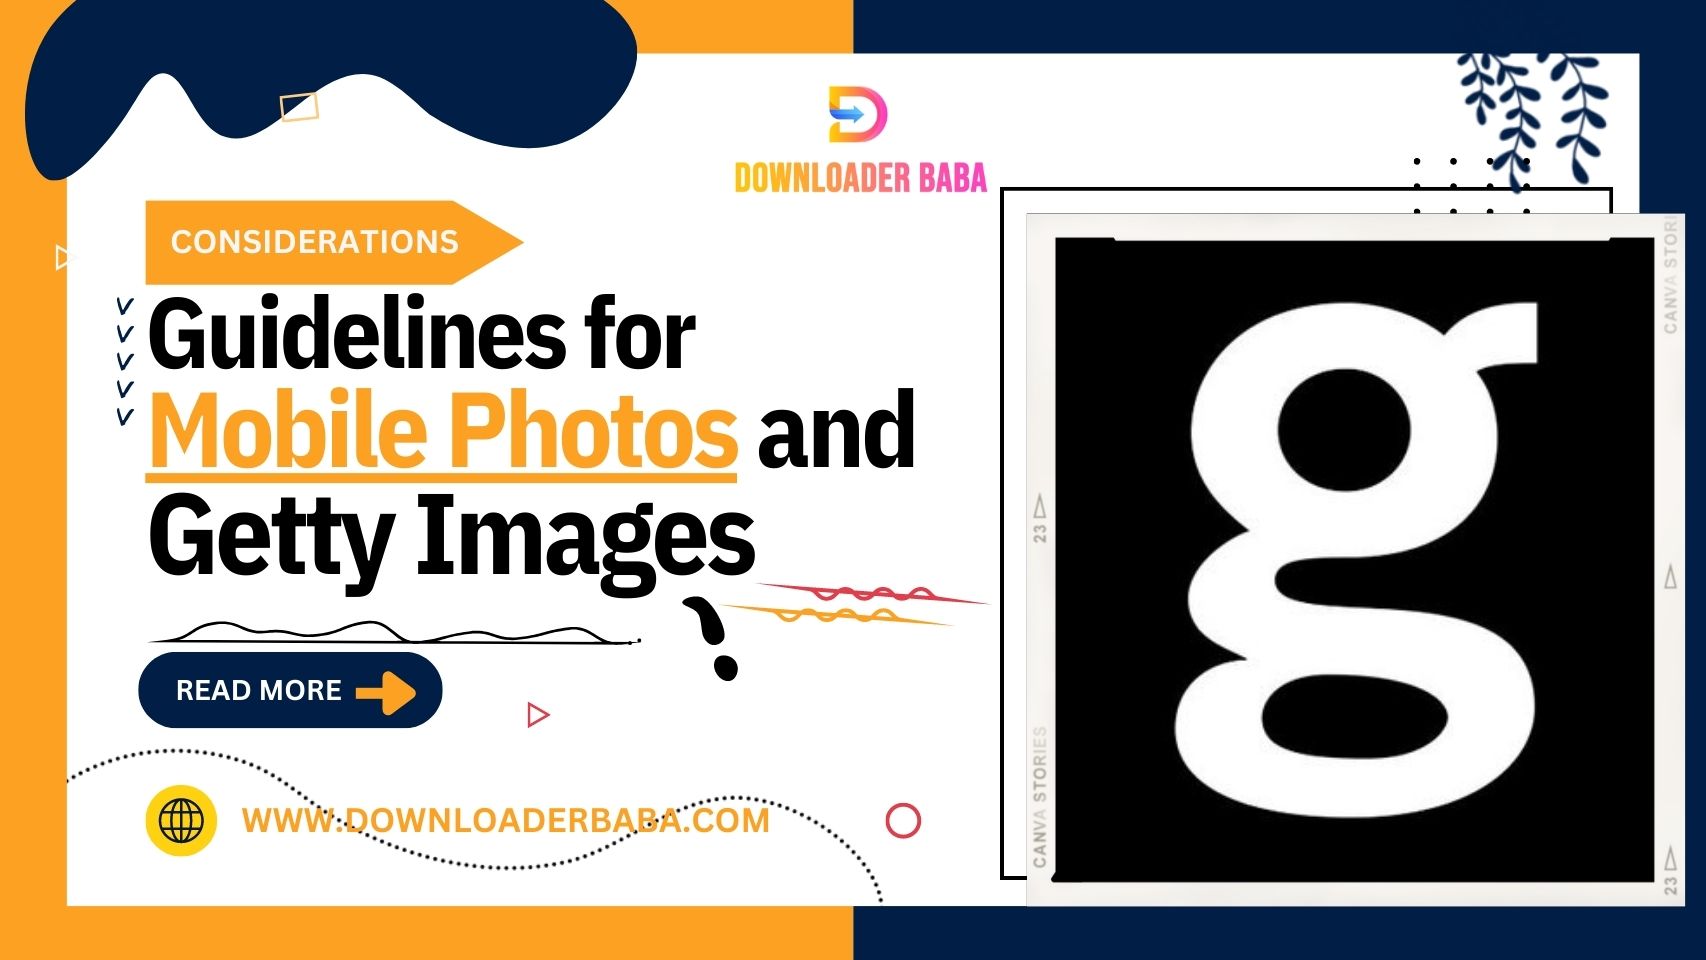 an image of Mobile Photos and Getty Images: Submission Guidelines and Quality Considerations